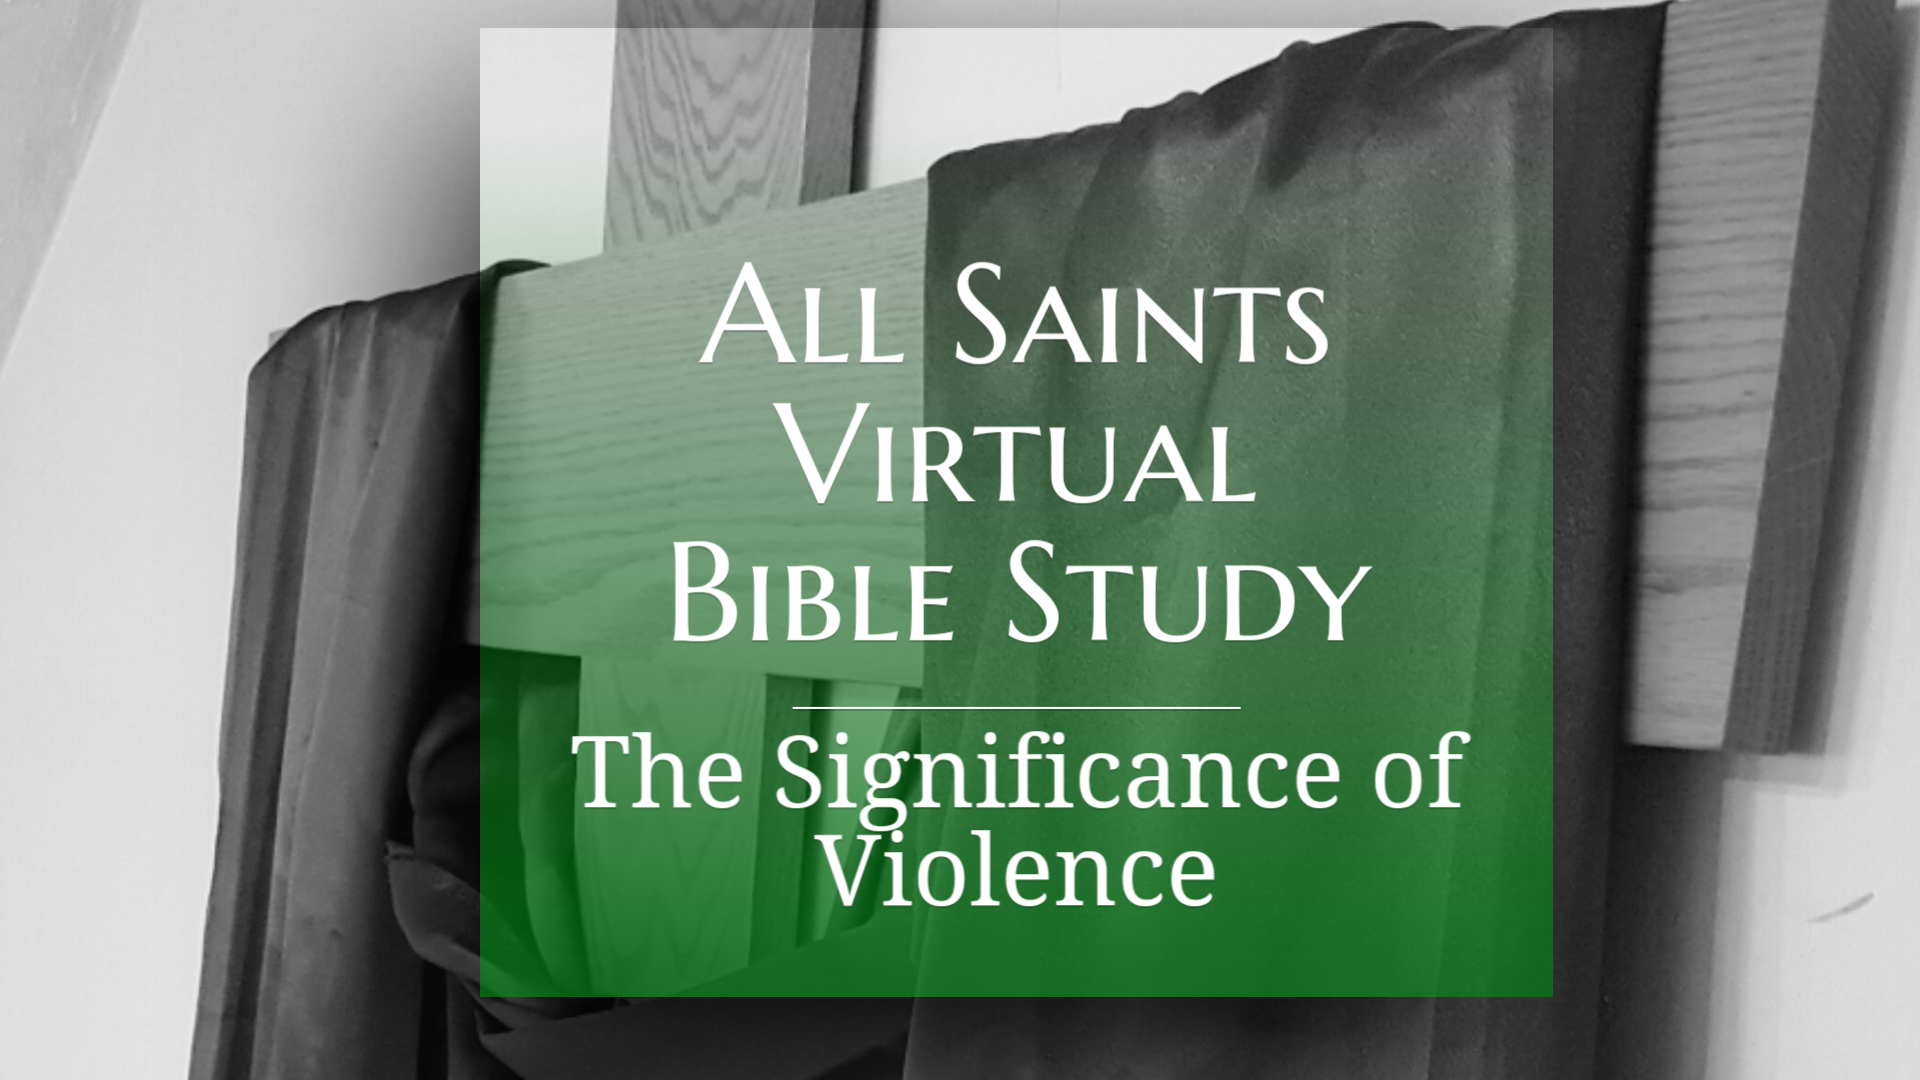 All Saints Virtual Bible Study - The Significance of Violence